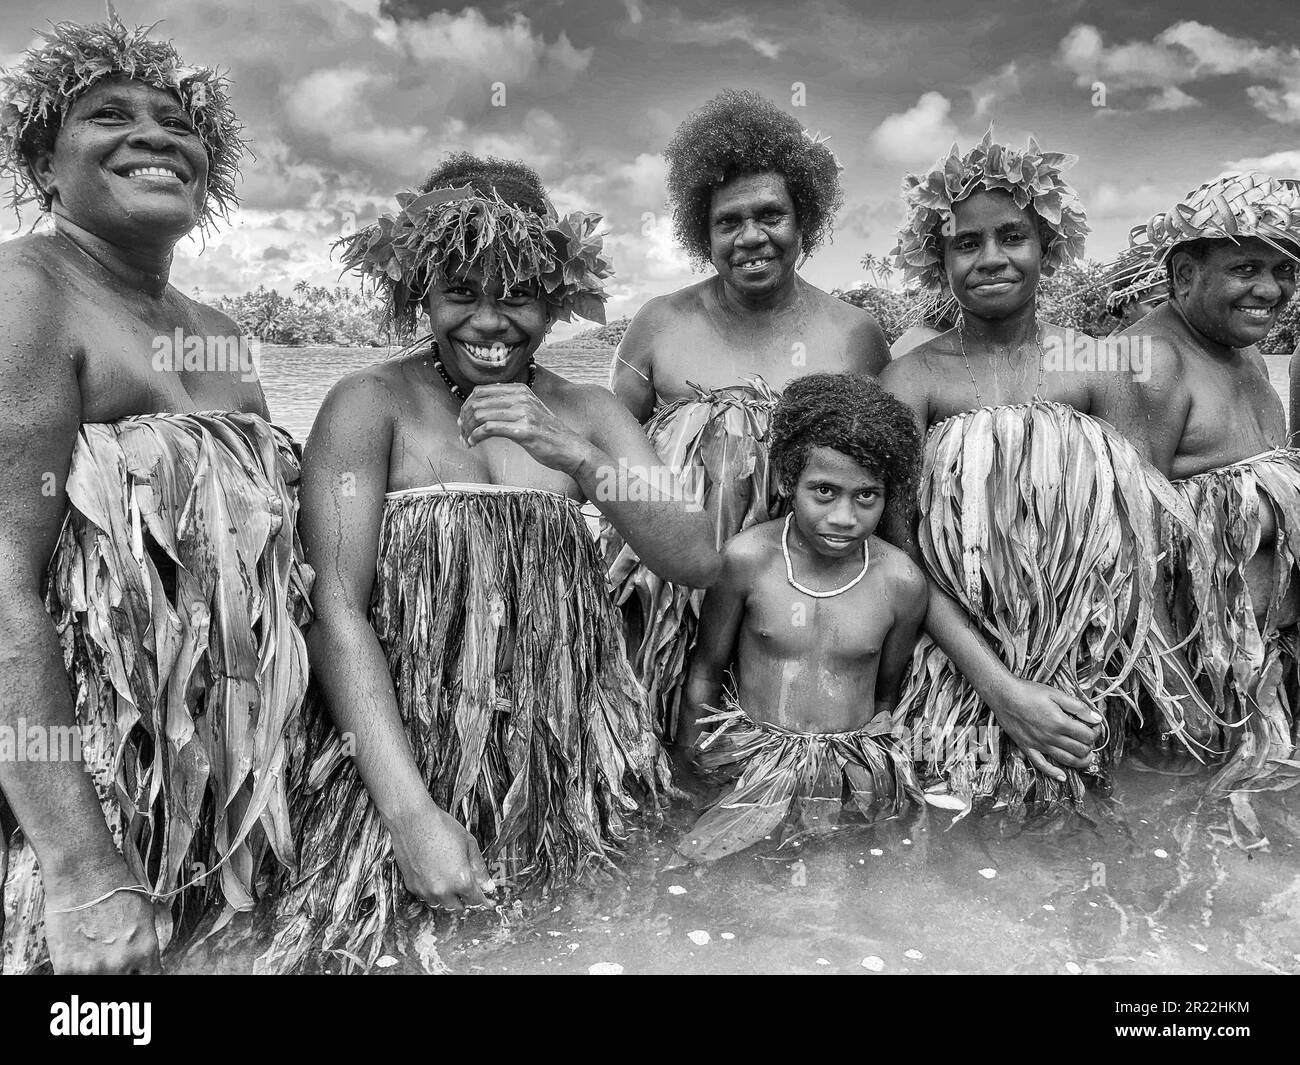 Water dancers in Vanuatu refer to a traditional form of dance and performance that takes place in or near water bodies, such as rivers, lakes, or the ocean. This unique cultural expression showcases the grace, agility, and storytelling of the performers as they move in sync with the rhythm of the water. Water dancers skillfully manipulate their bodies, creating fluid movements that mimic the flow and energy of the surrounding water. They often wear vibrant costumes and adornments, adding visual splendor to their captivating performances. Stock Photo